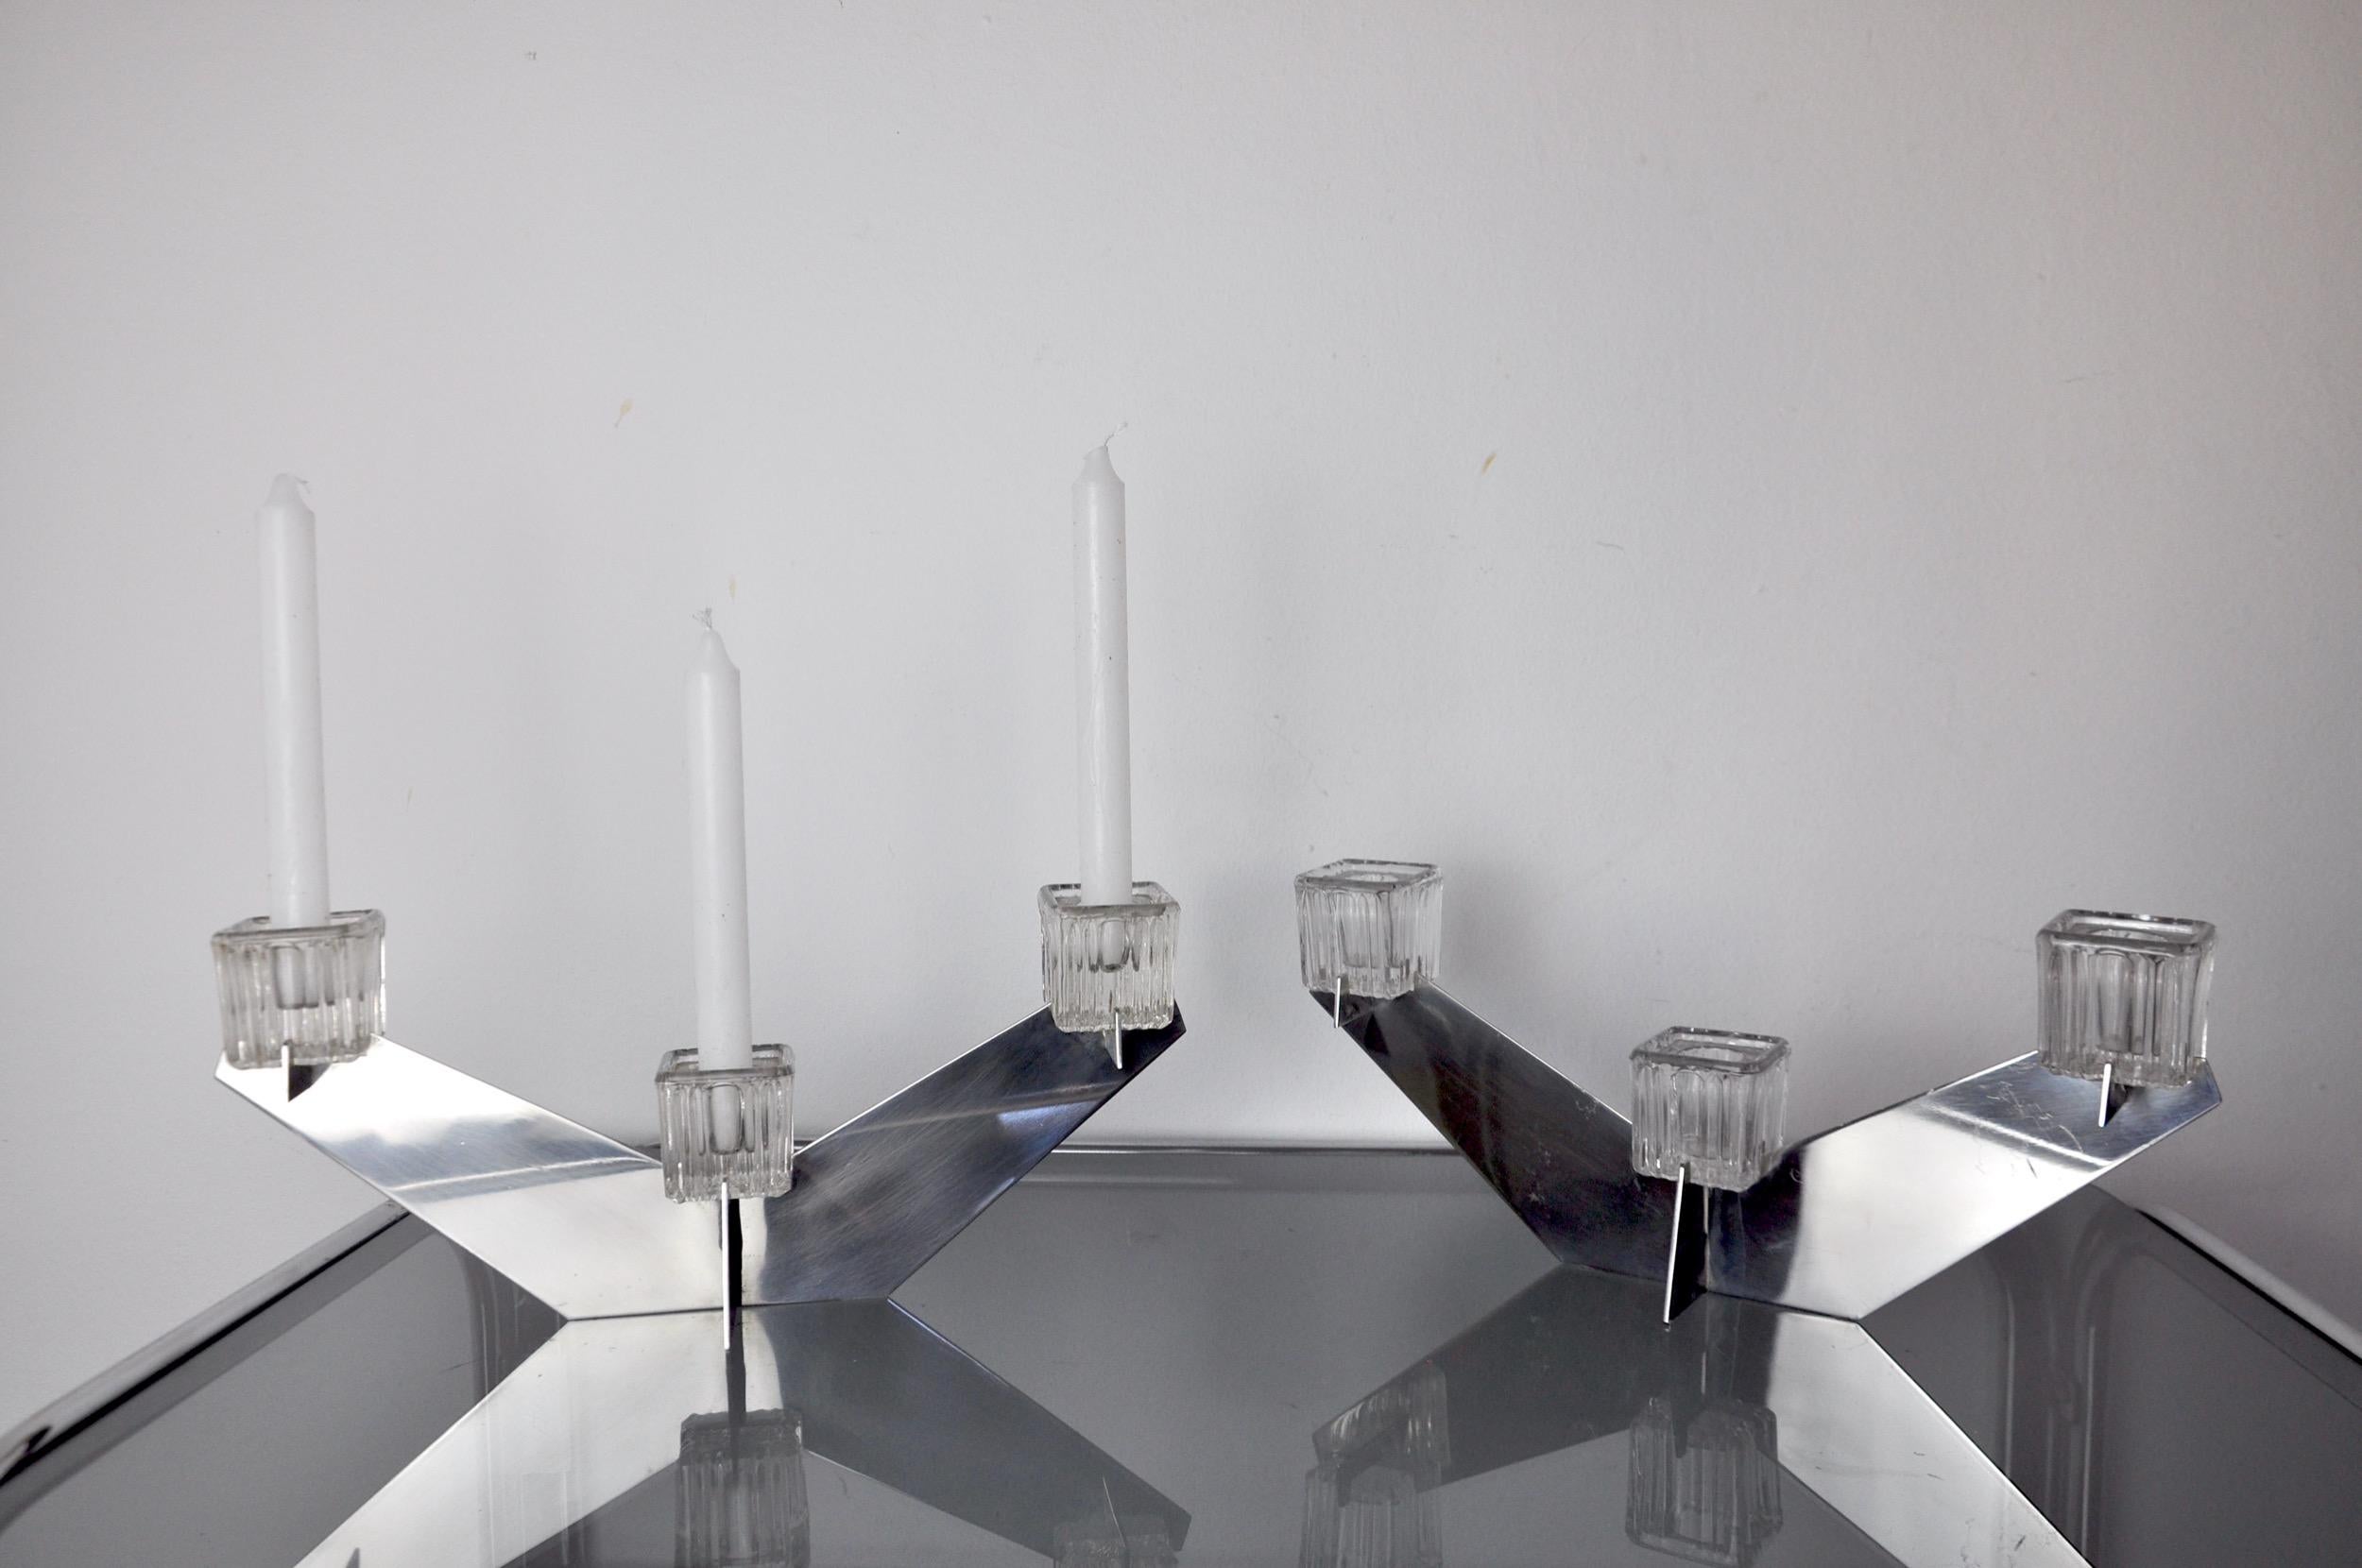 Pair of glass candle holders designed and produced by peill and putzler in germany in the 1970s.

Set of two candle holders in geometric chromed metal and transparent glass that can support 3 candles.

Beautiful decorative objects that will